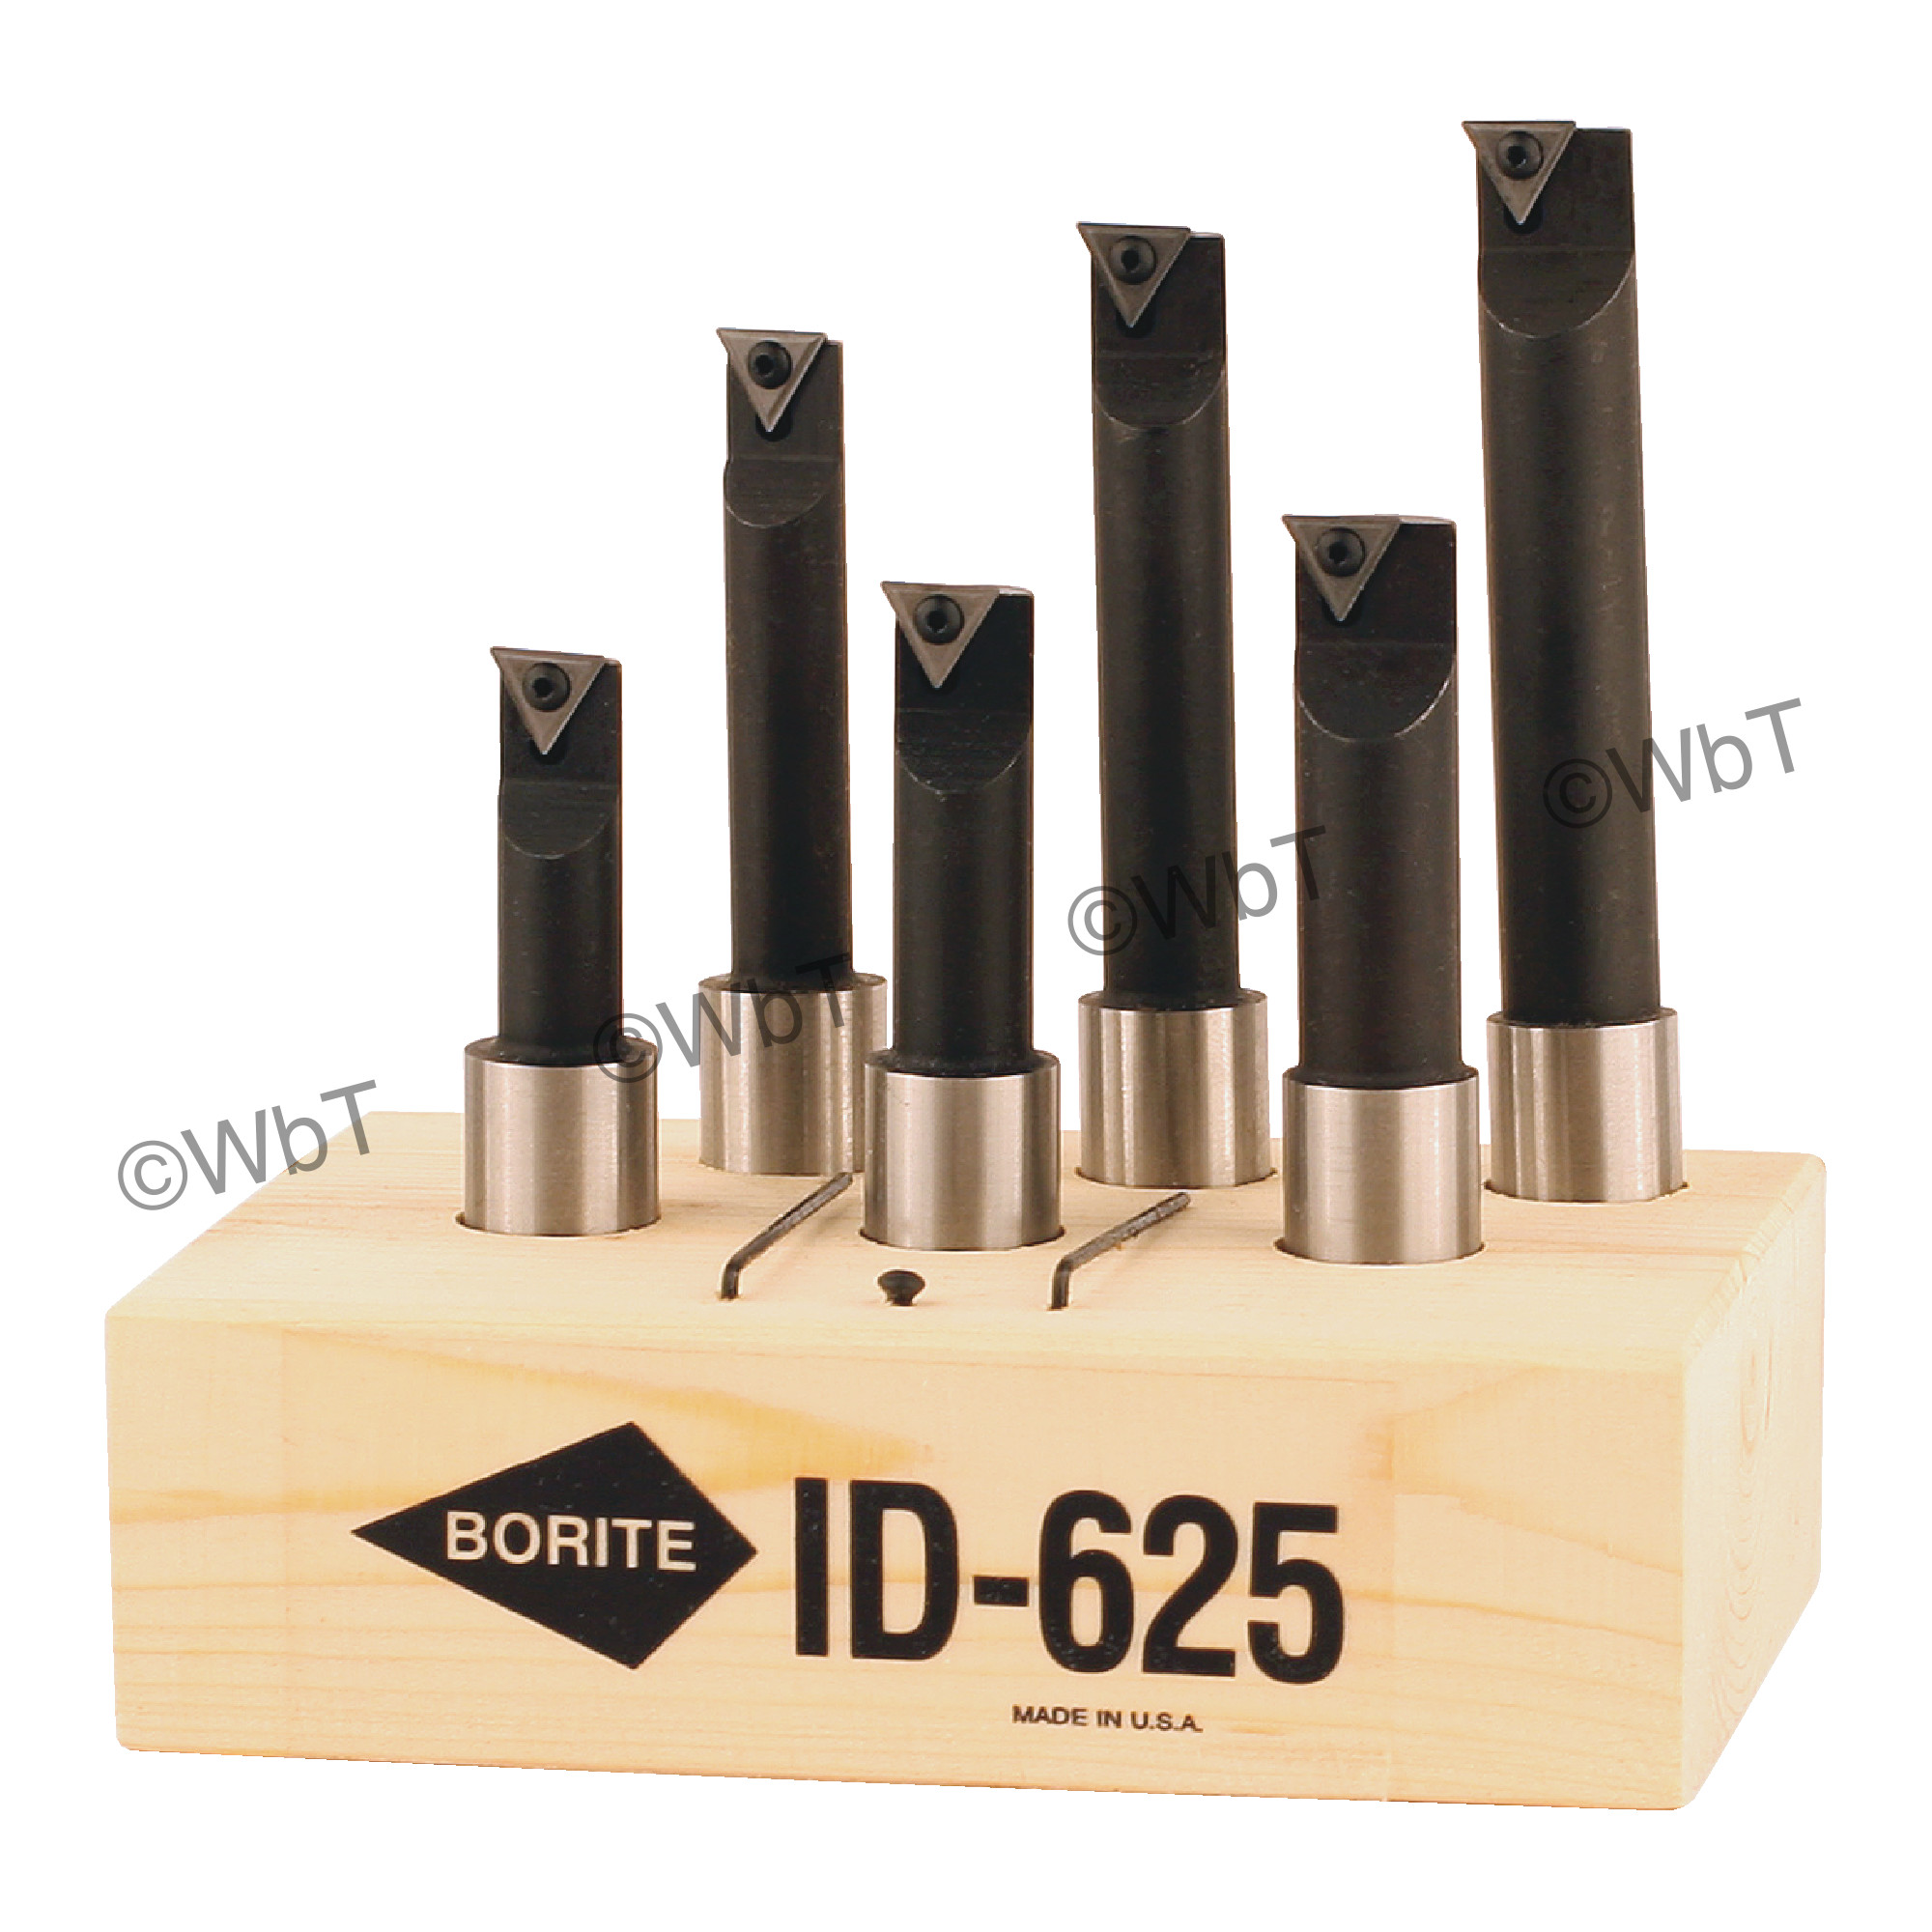 BORITE - ID-625 SET Steel / Boring Bar Set with 6 Different 5/8" With BTT-221 C5 Uncoated Inserts / Right Hand